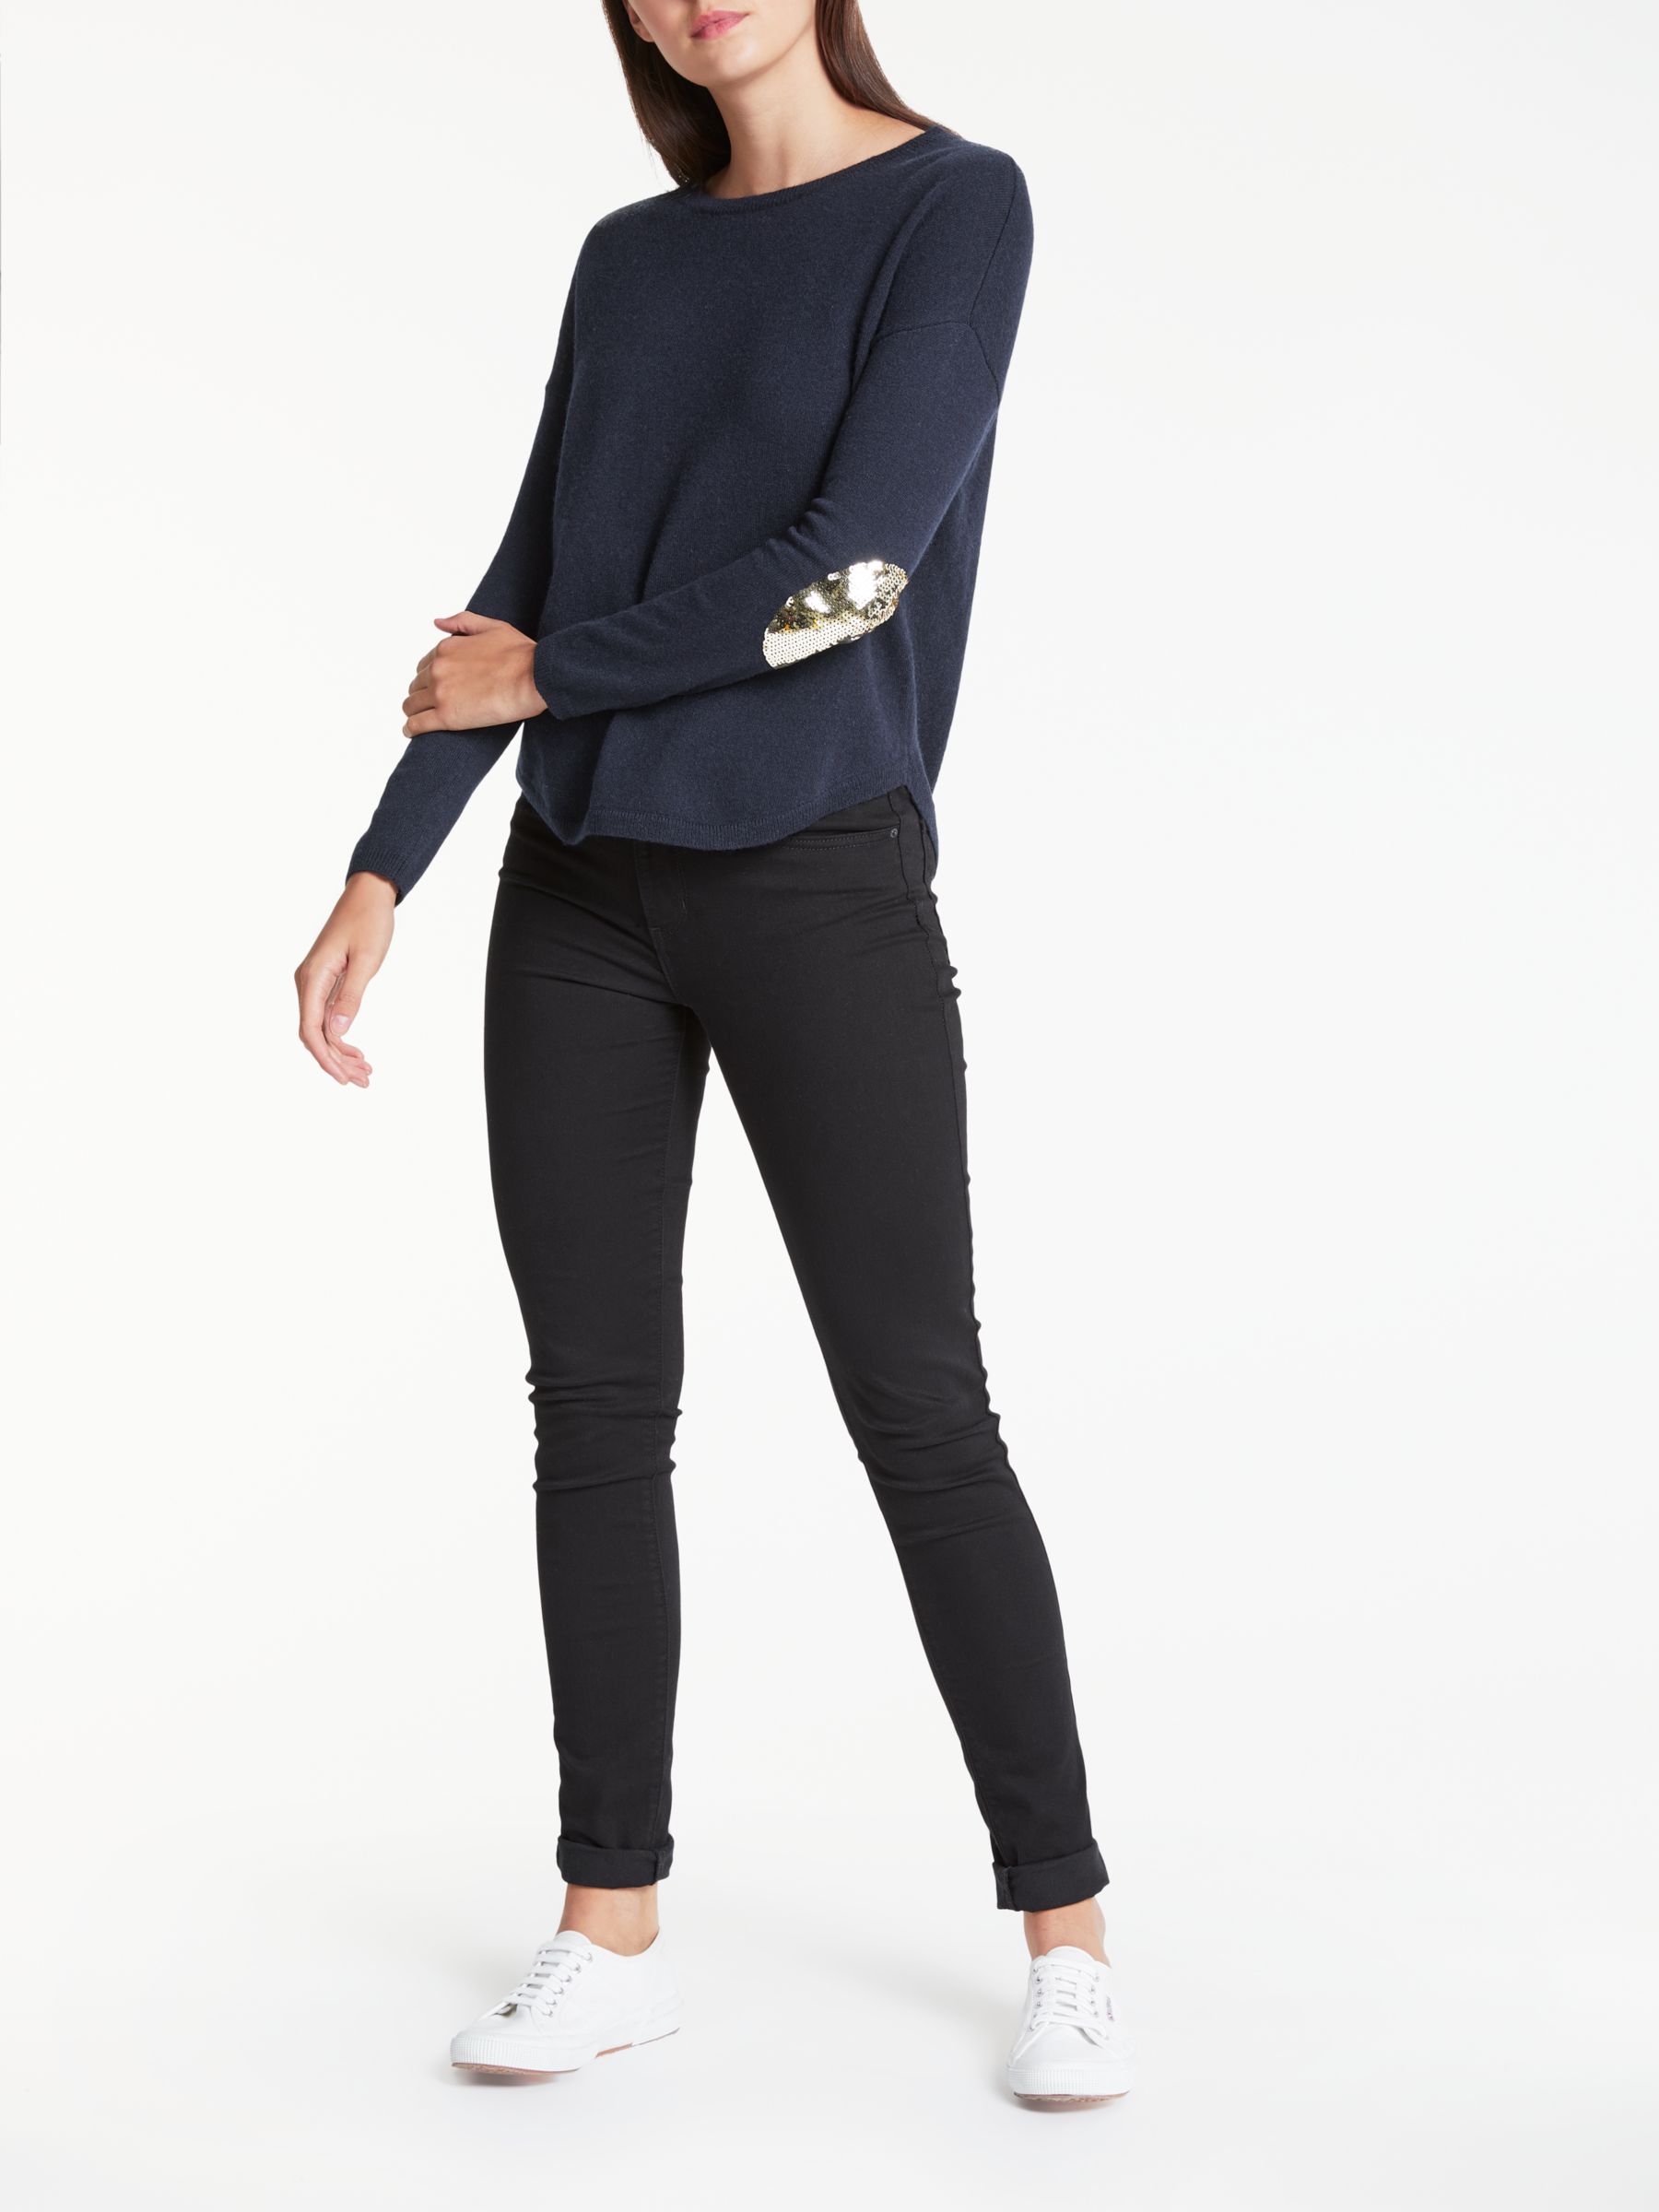 Wyse London Flo Sequin Slouchy Cashmere Jumper at John Lewis & Partners